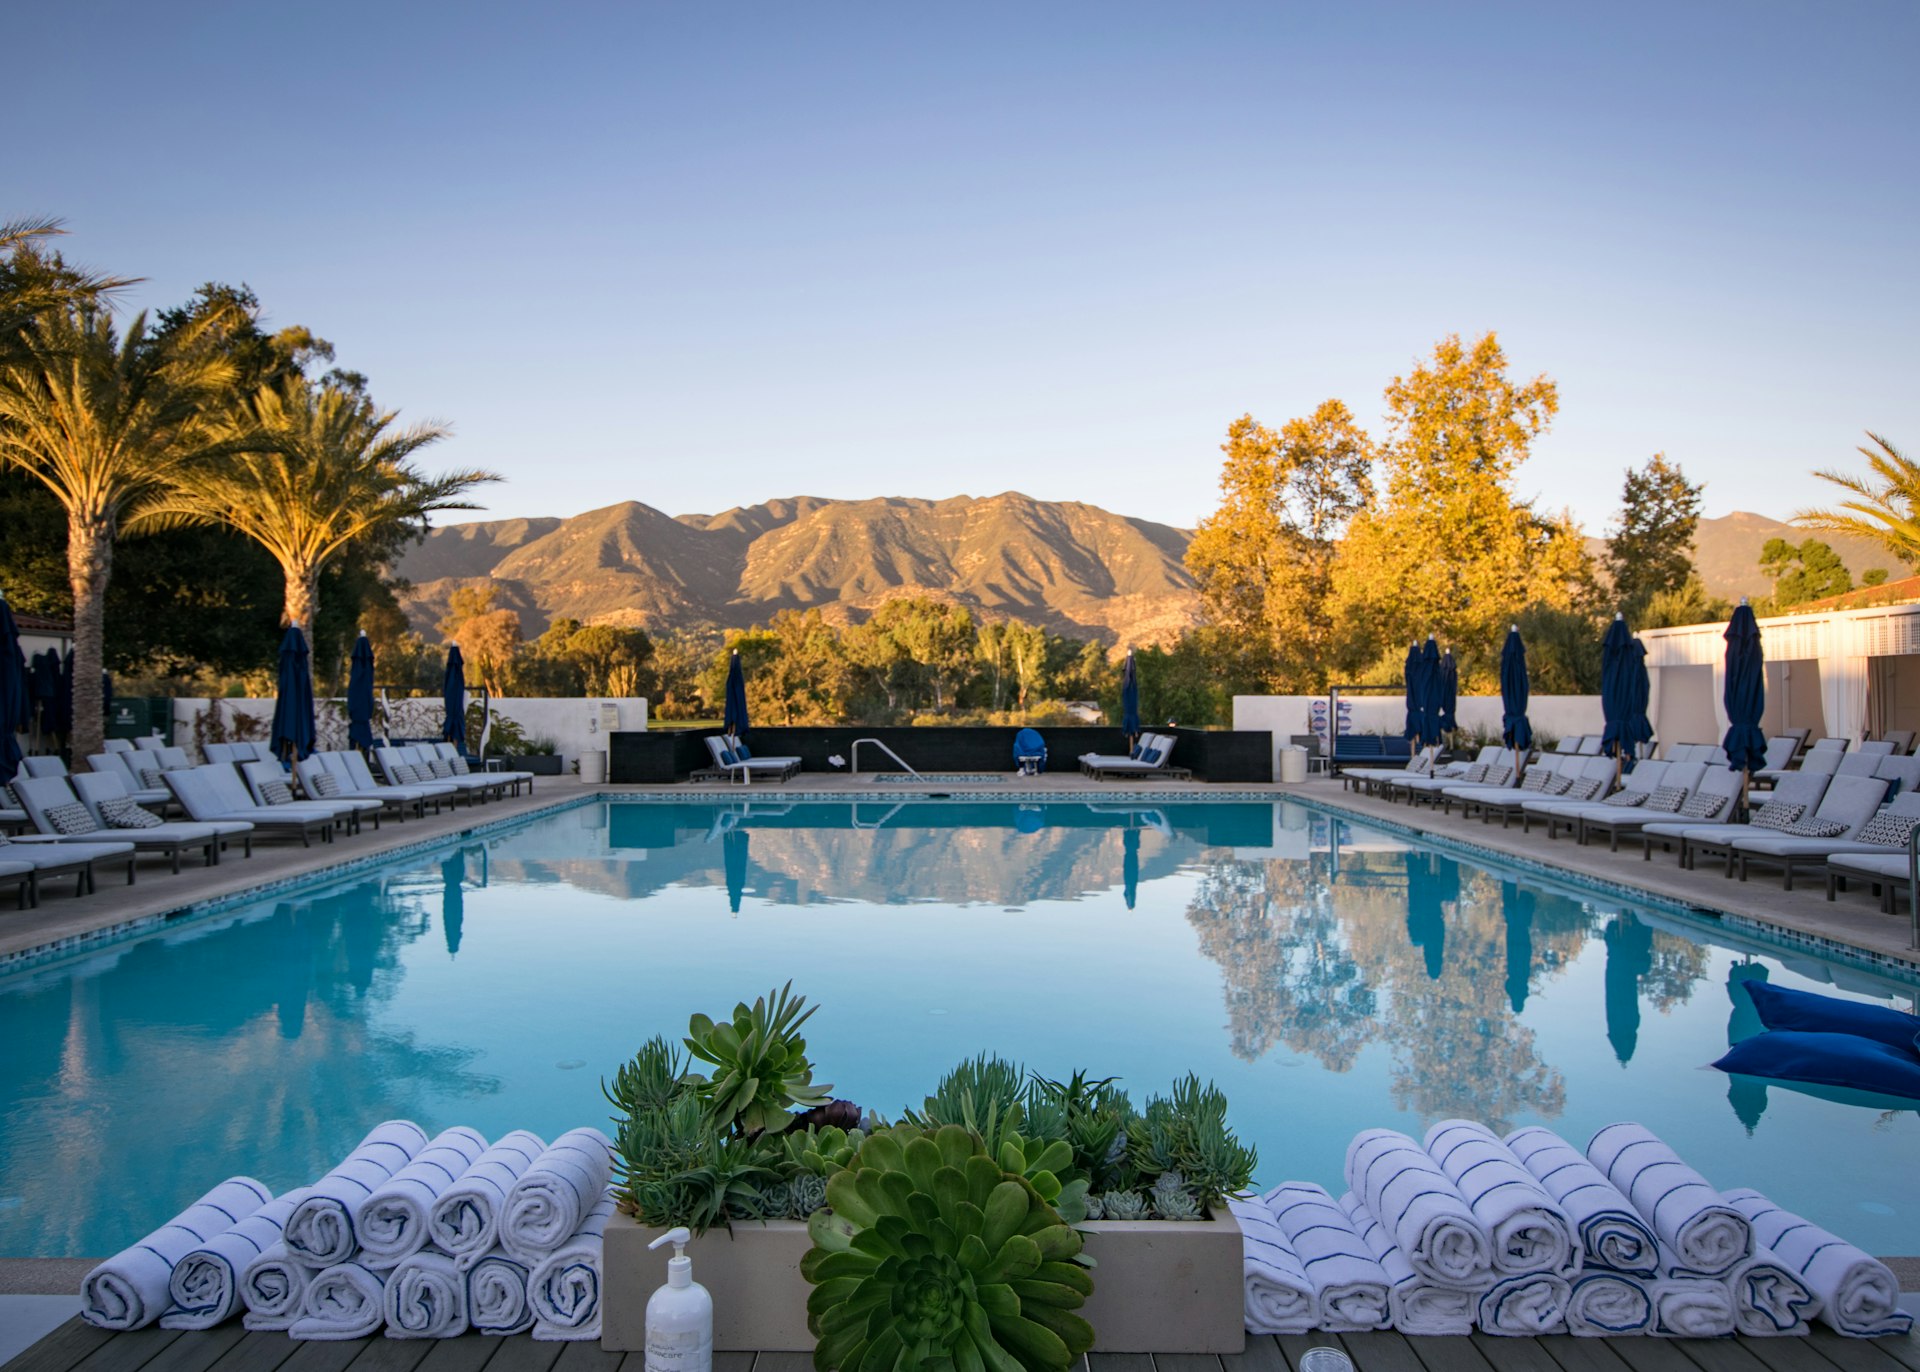 The pool area at Ojai Valley Inn & Spa in autumn, with empty sun loungers and a mountain range in the distance